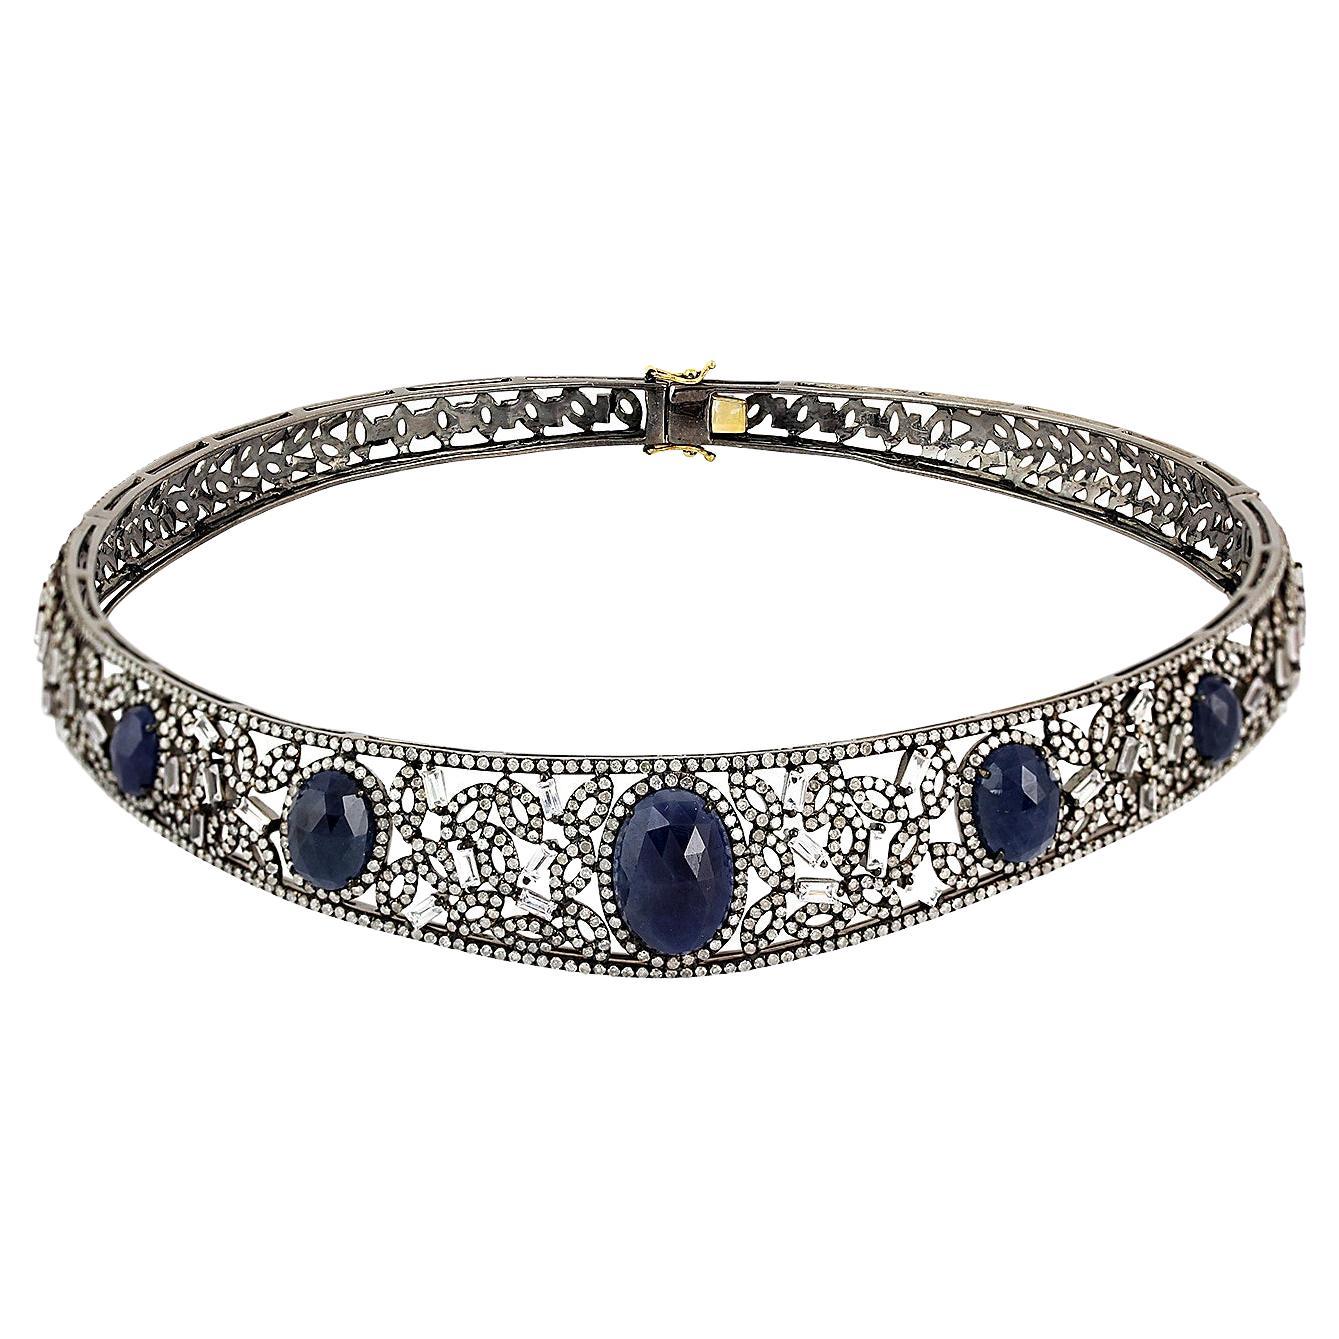 Choker Necklace With Oval Shaped Sapphires & Pave Diamonds In 18k Gold & Silver